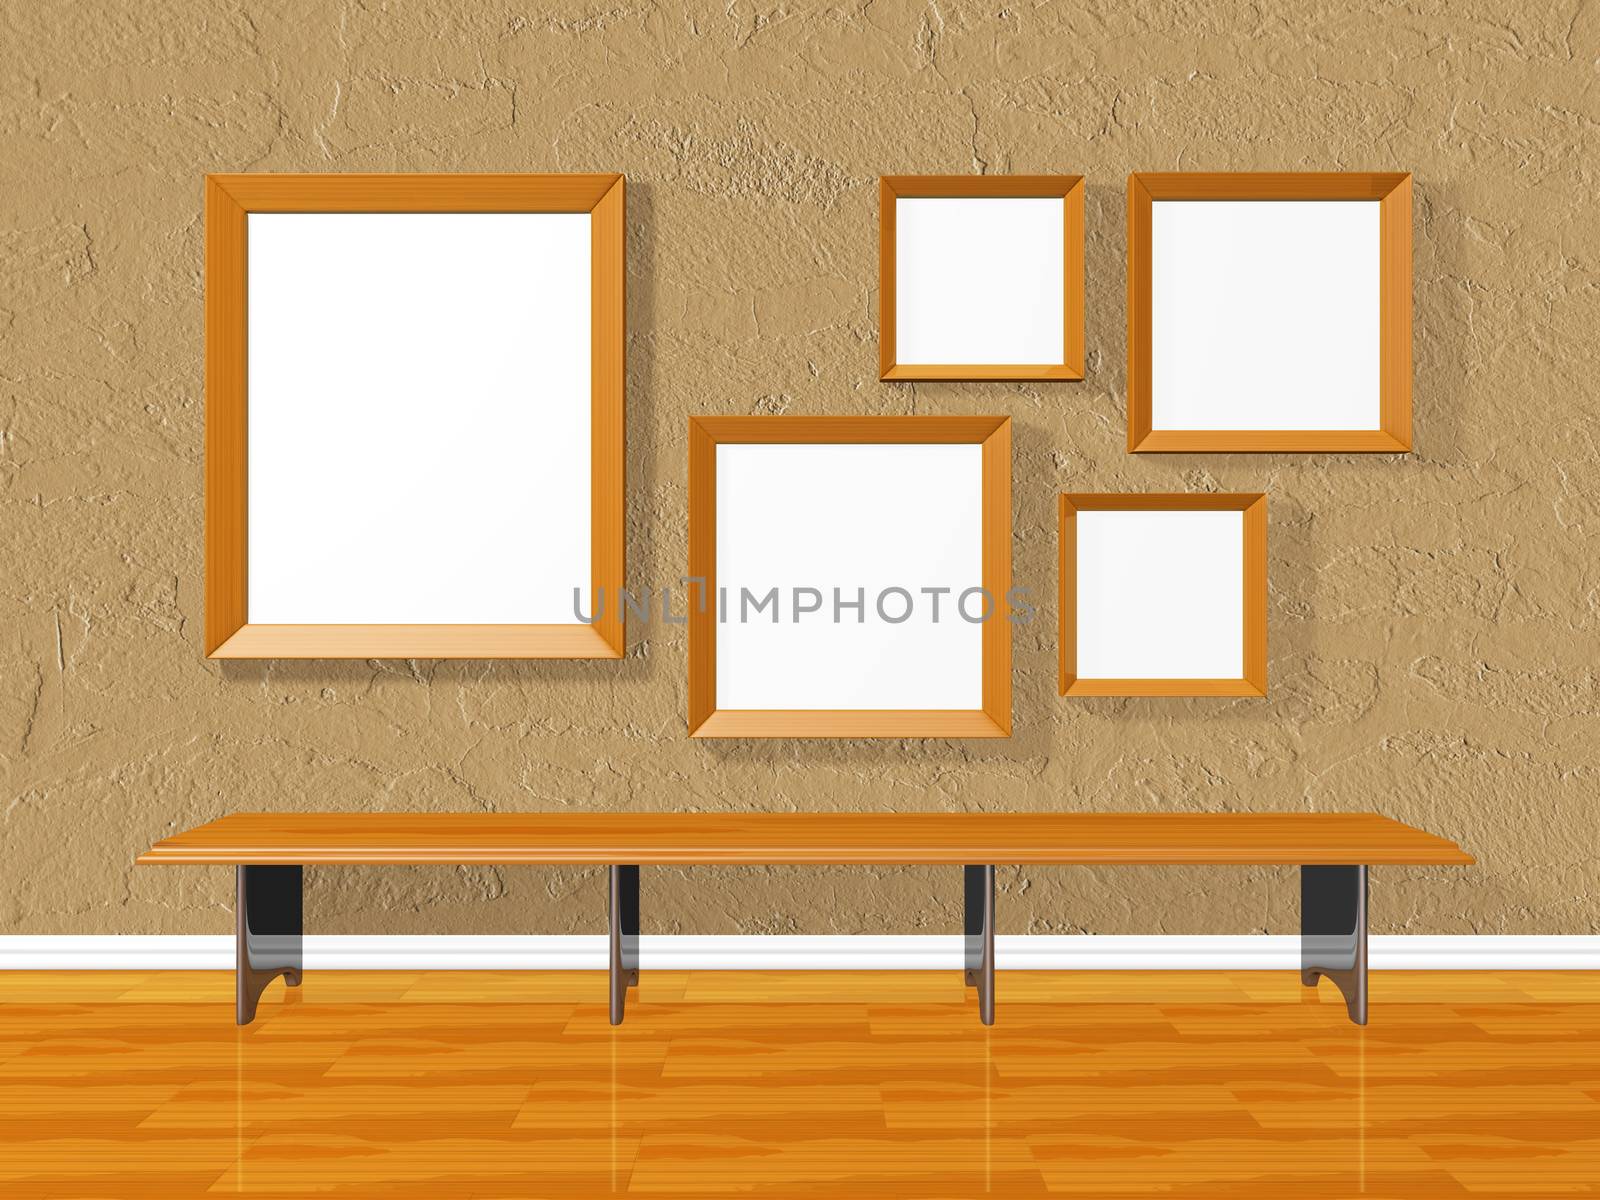 Art Gallery with Empty Picture Frames by RichieThakur